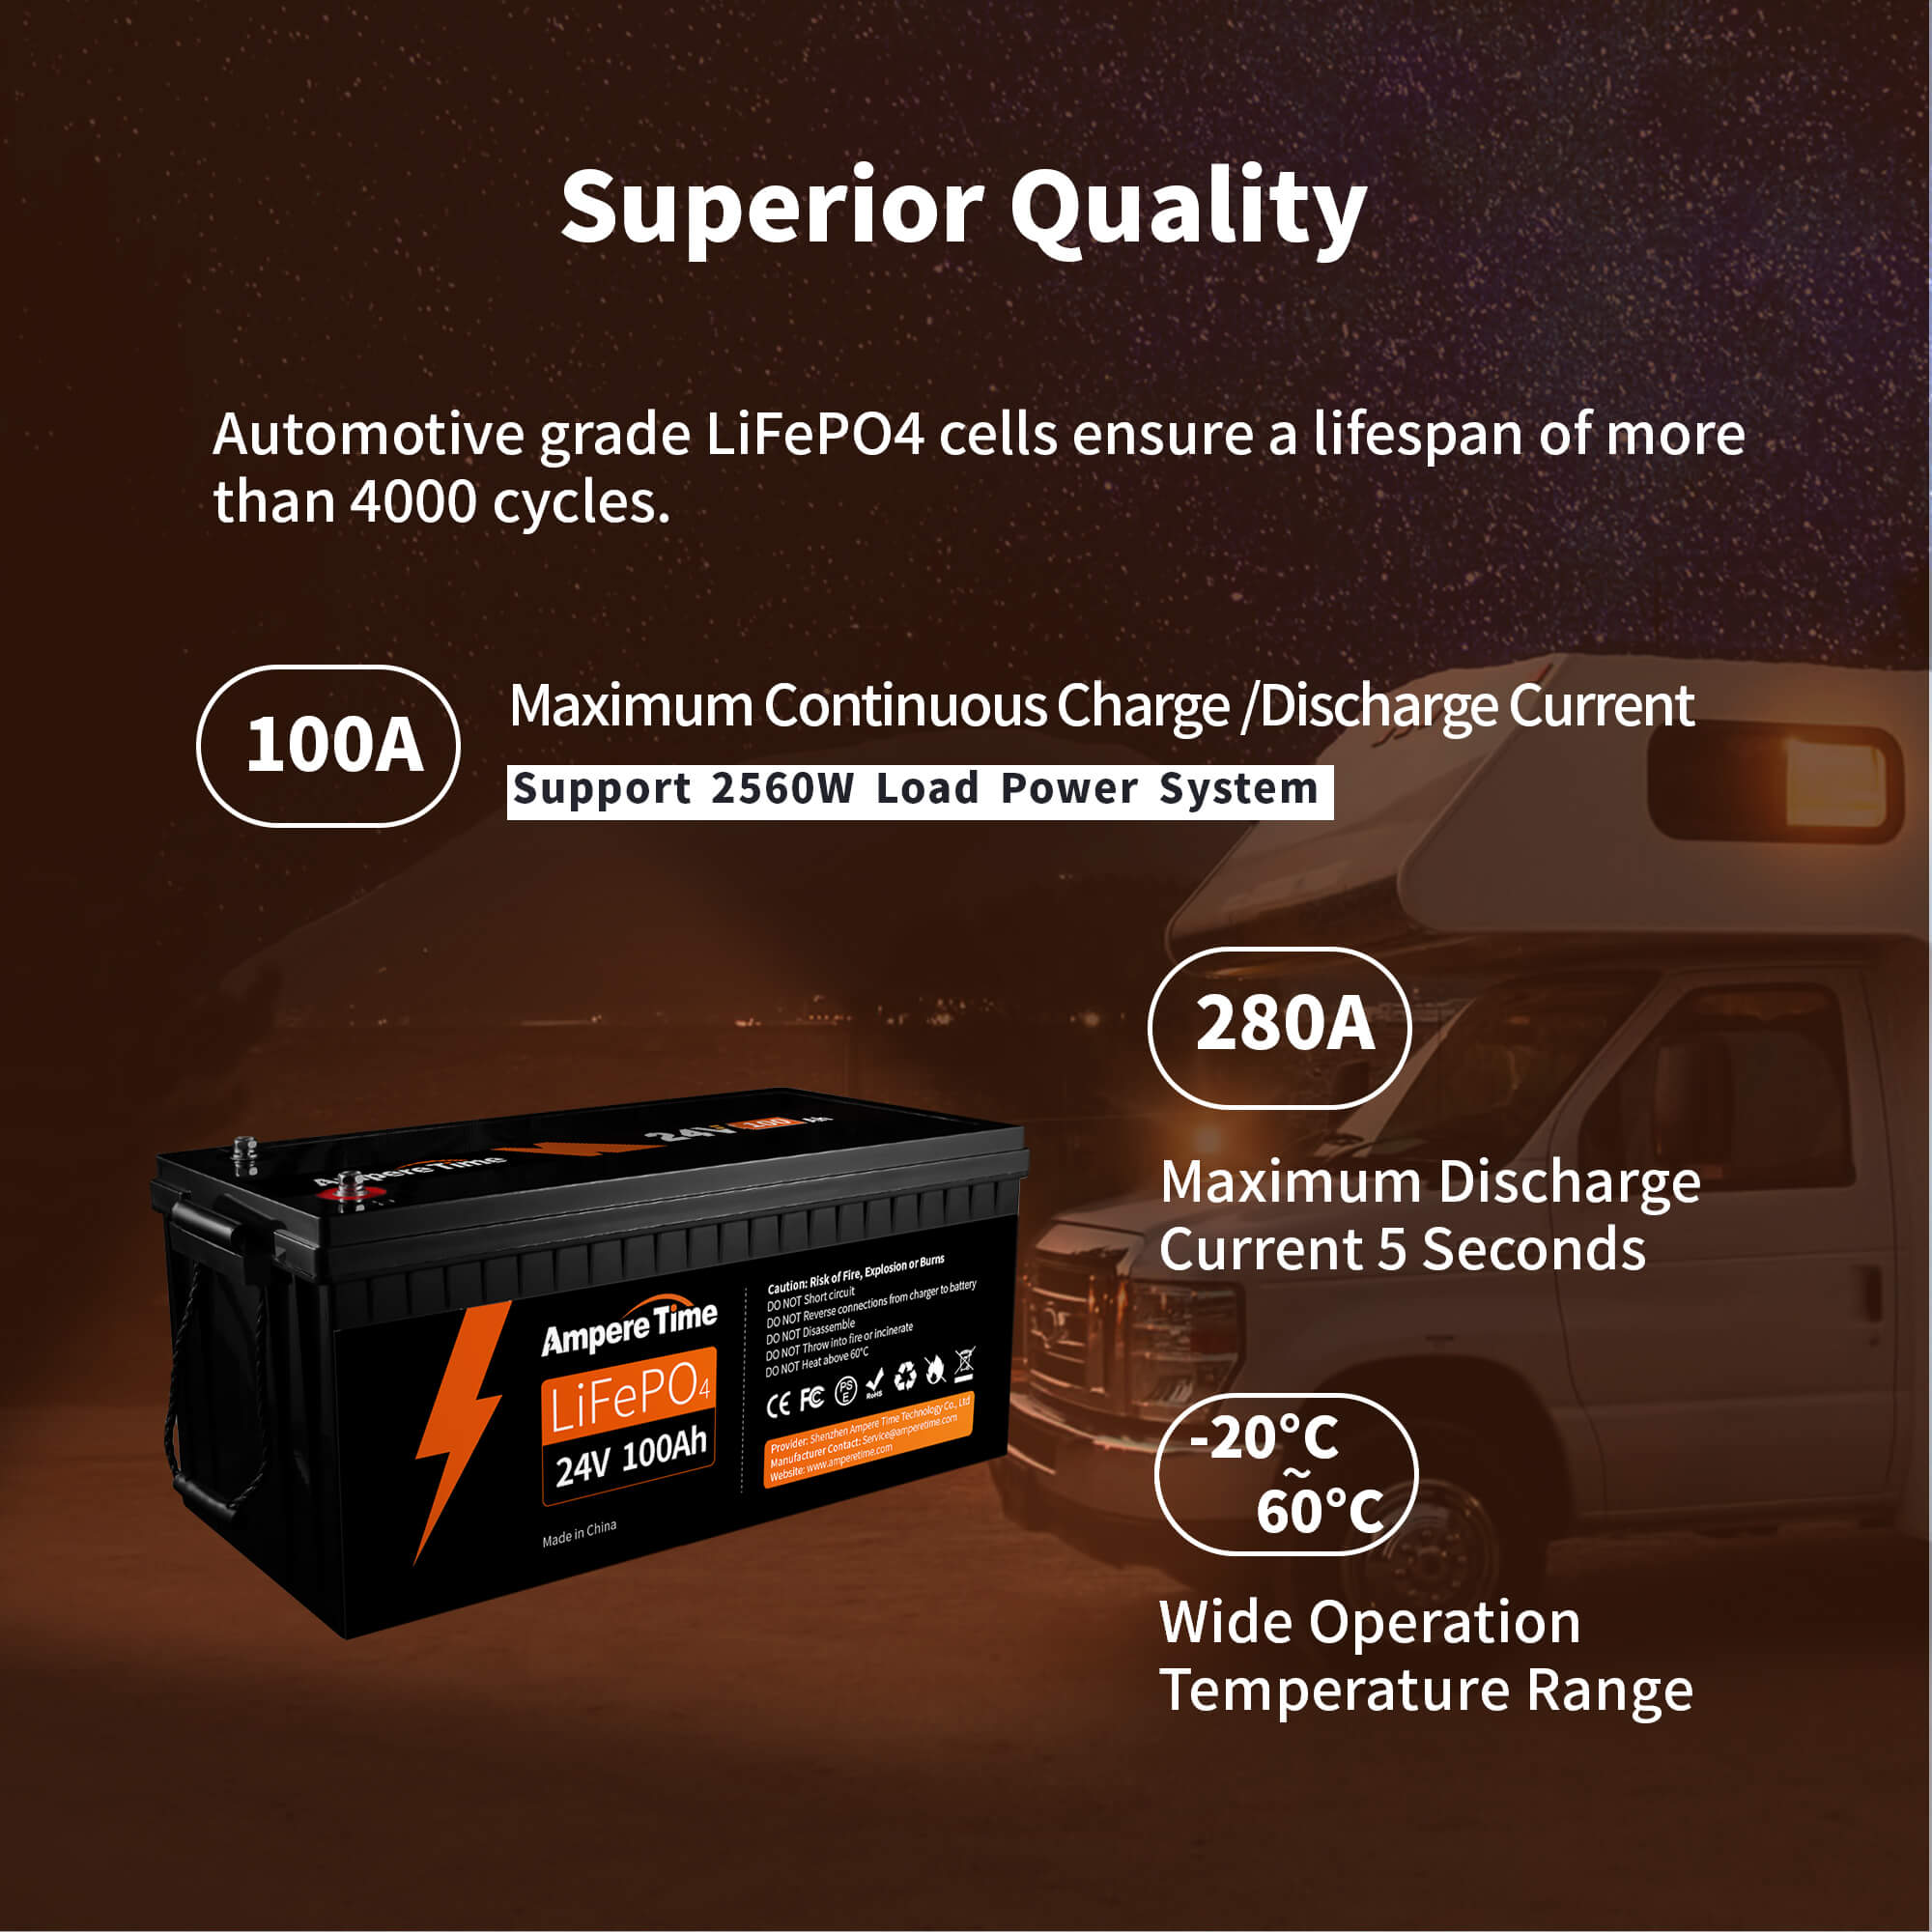 Ampere Time 24V 100Ah Lithium LiFePO4 Battery Ampere Time